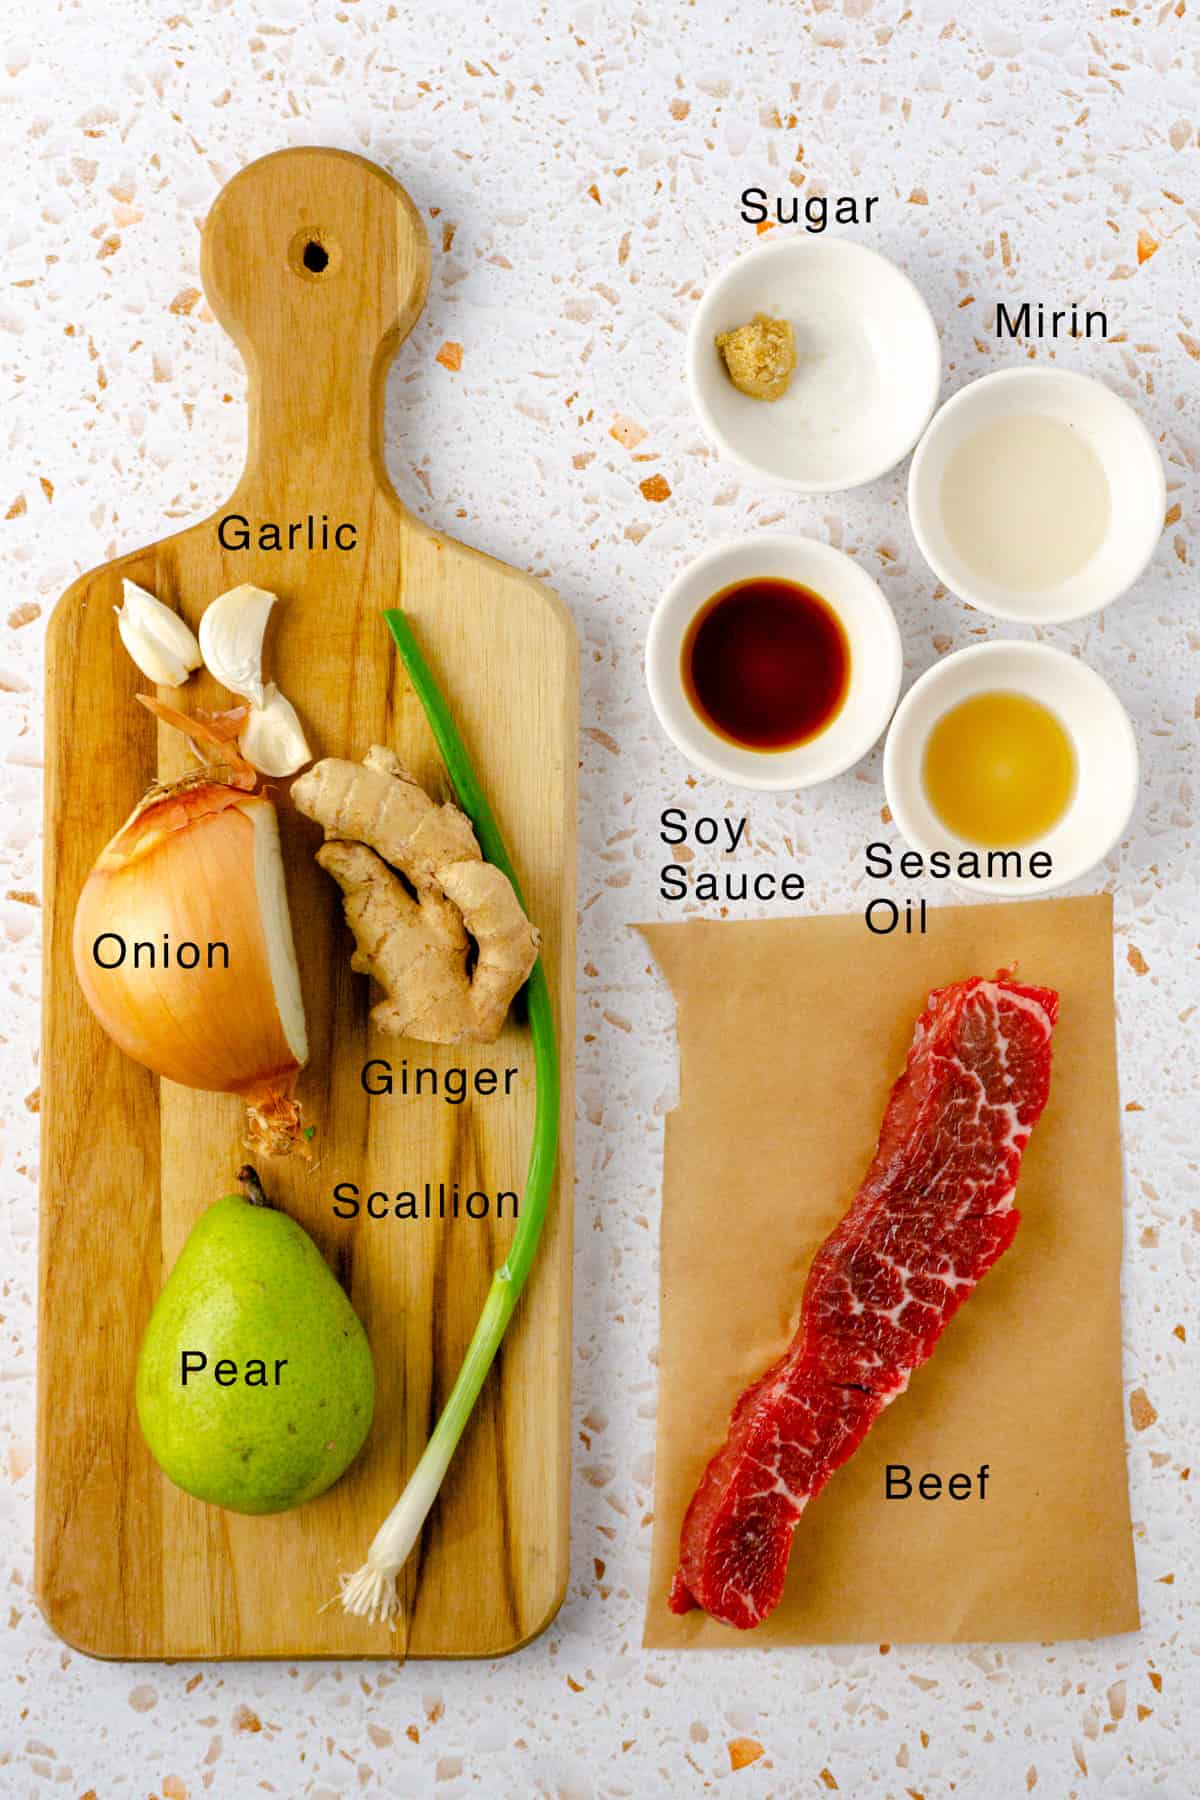 Ingredients for the recipe laid out on the table.